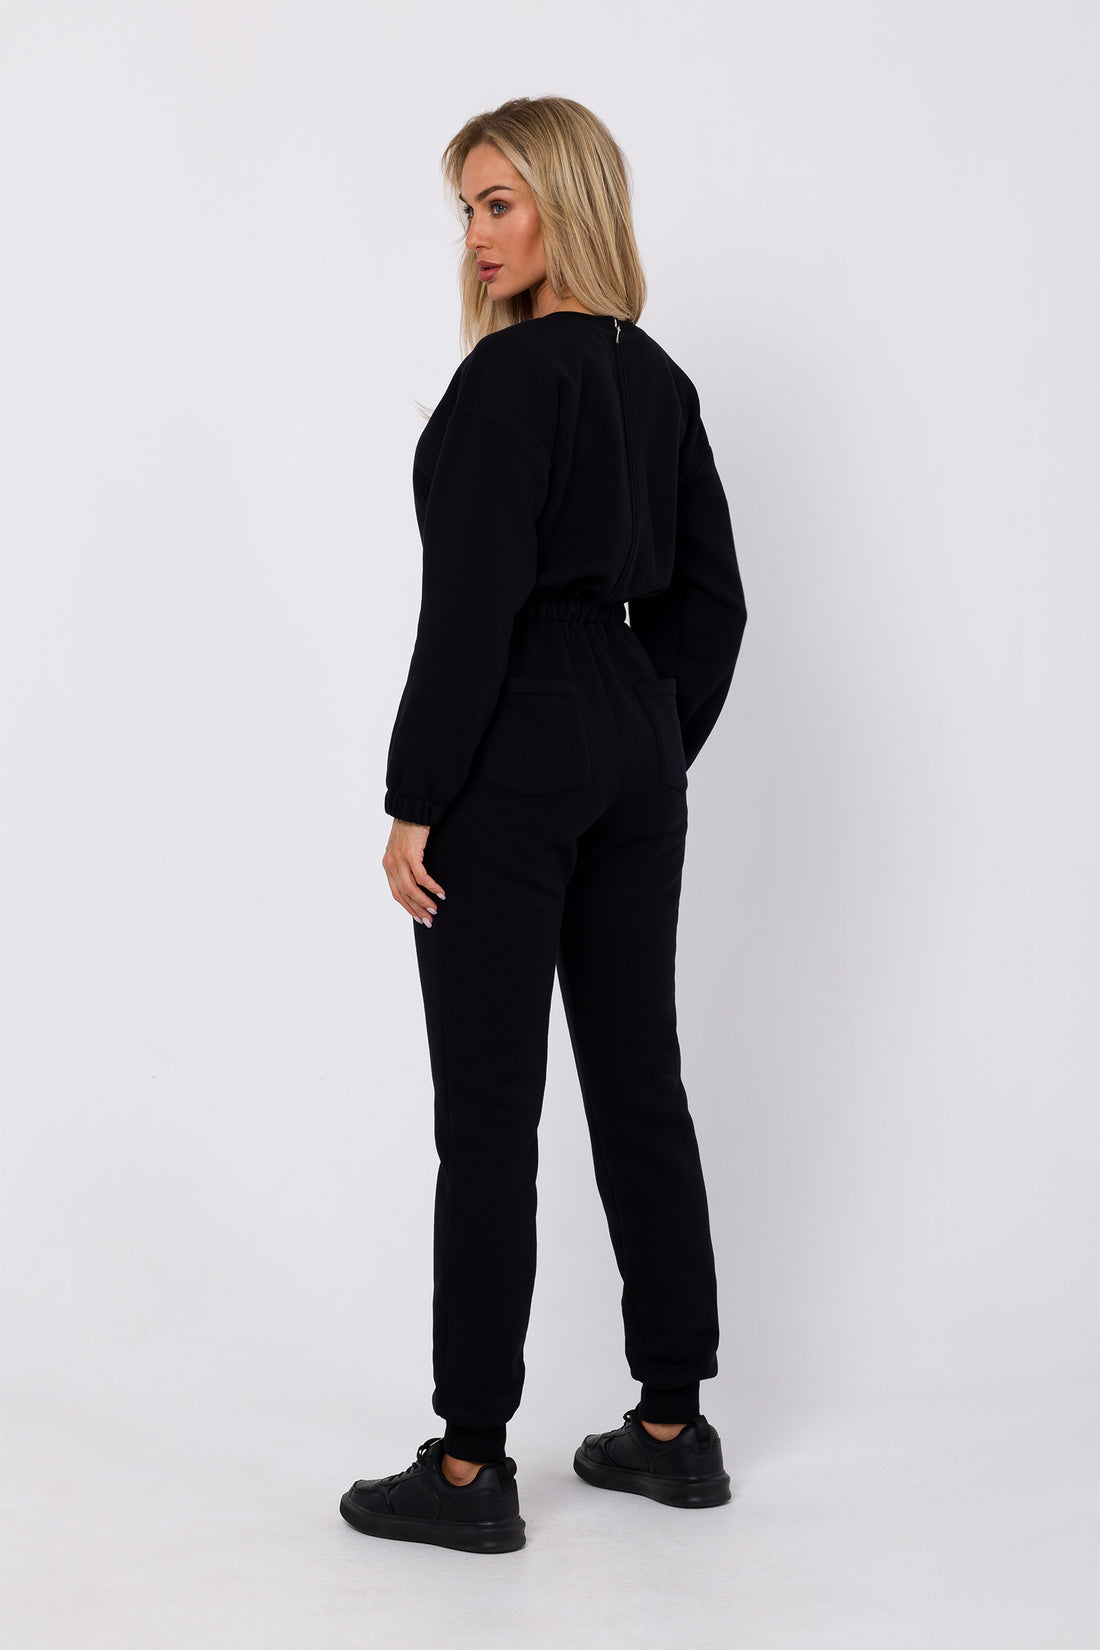 One-Piece Sweatshirt Jumpsuit | Strictly In | Embrace casual chic with our knit one-piece jumpsuit. Long sleeves, elasticated waist, and practical pockets make it your go-to for easy, stylish comfort.